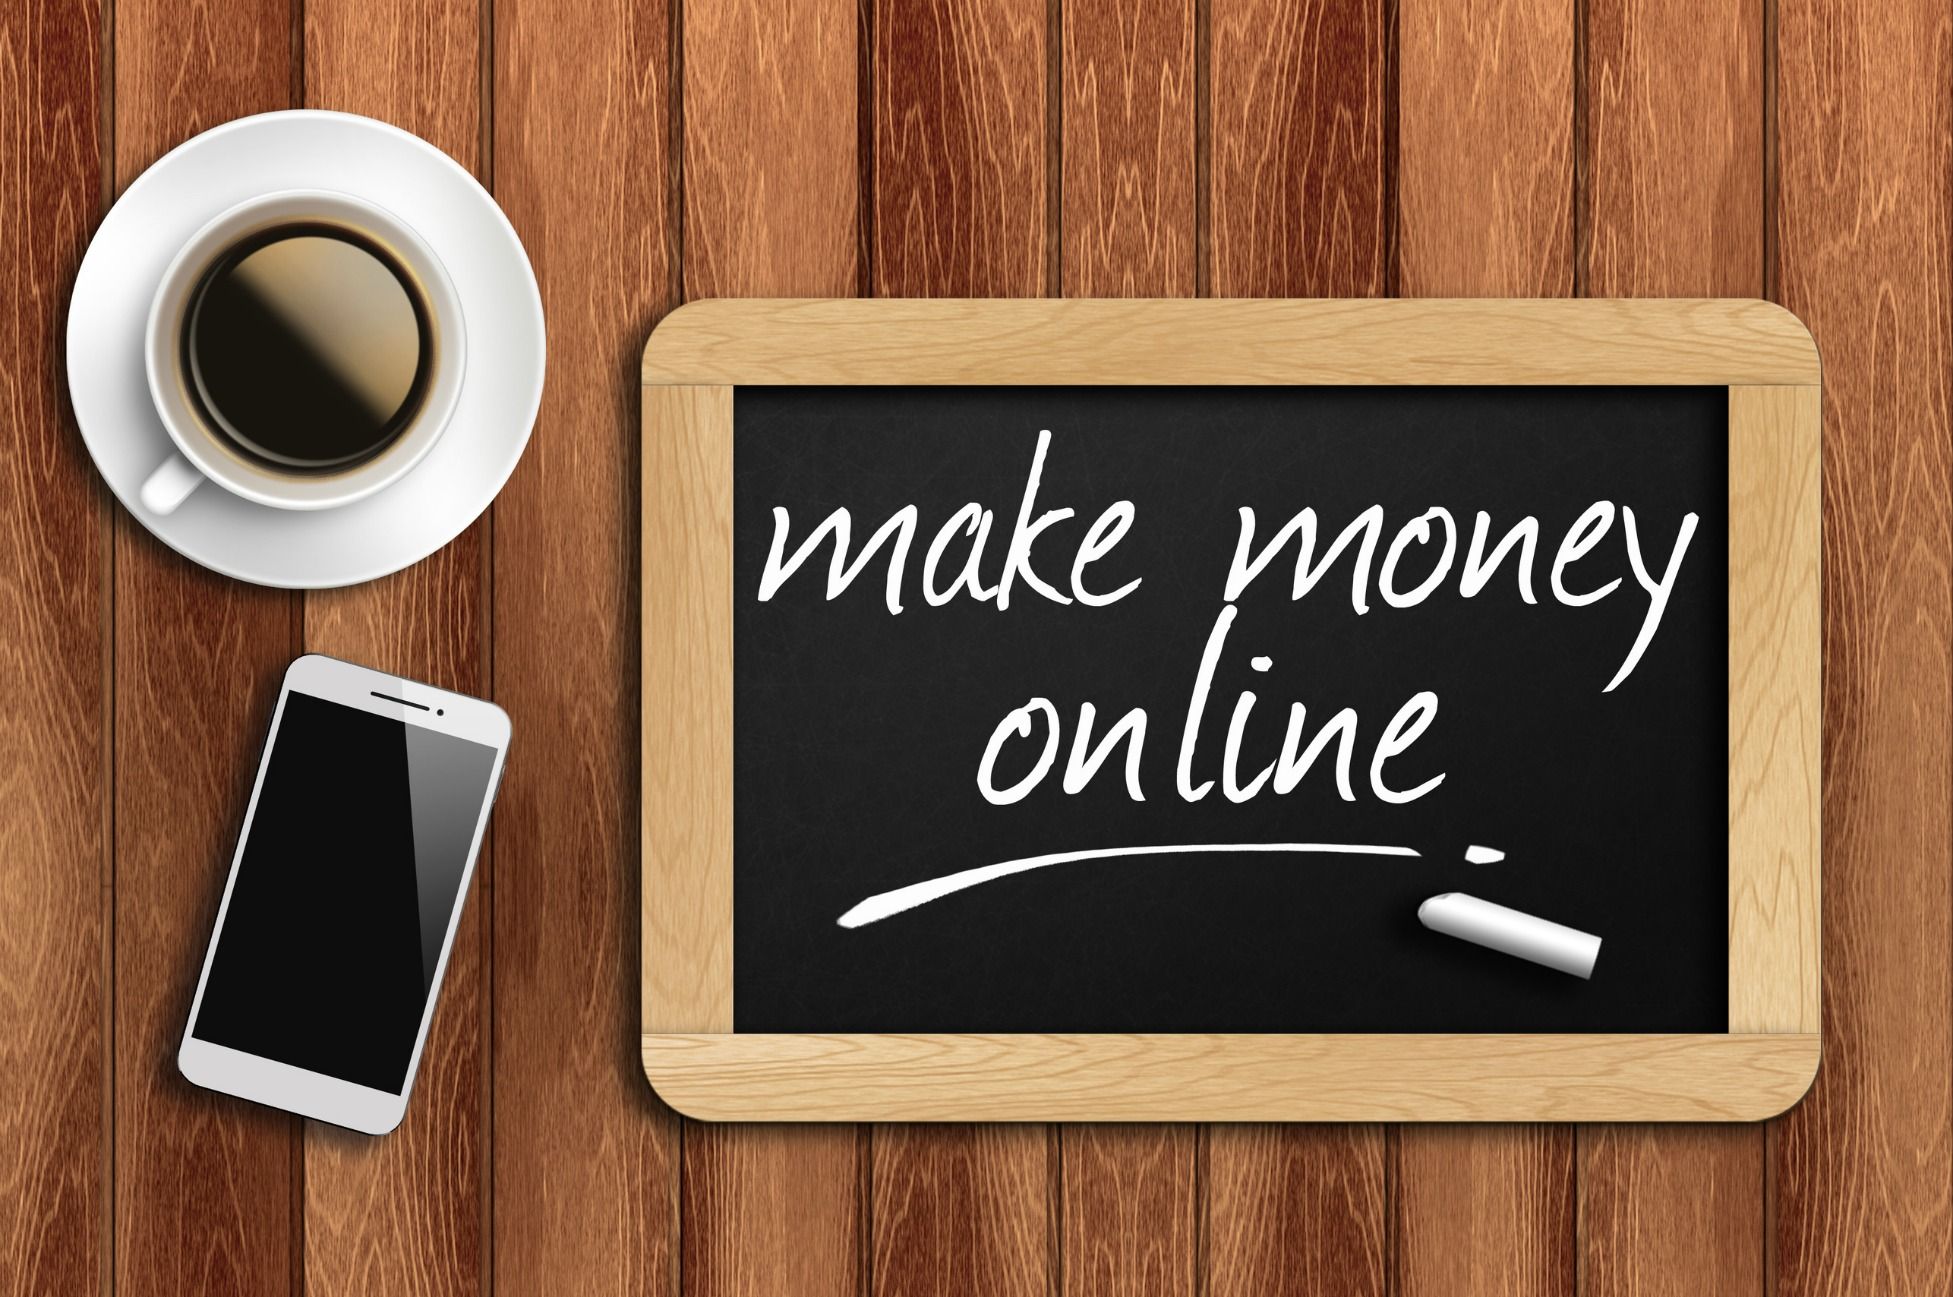 5-real-ways-to-make-money-online-from-home-1.jpg